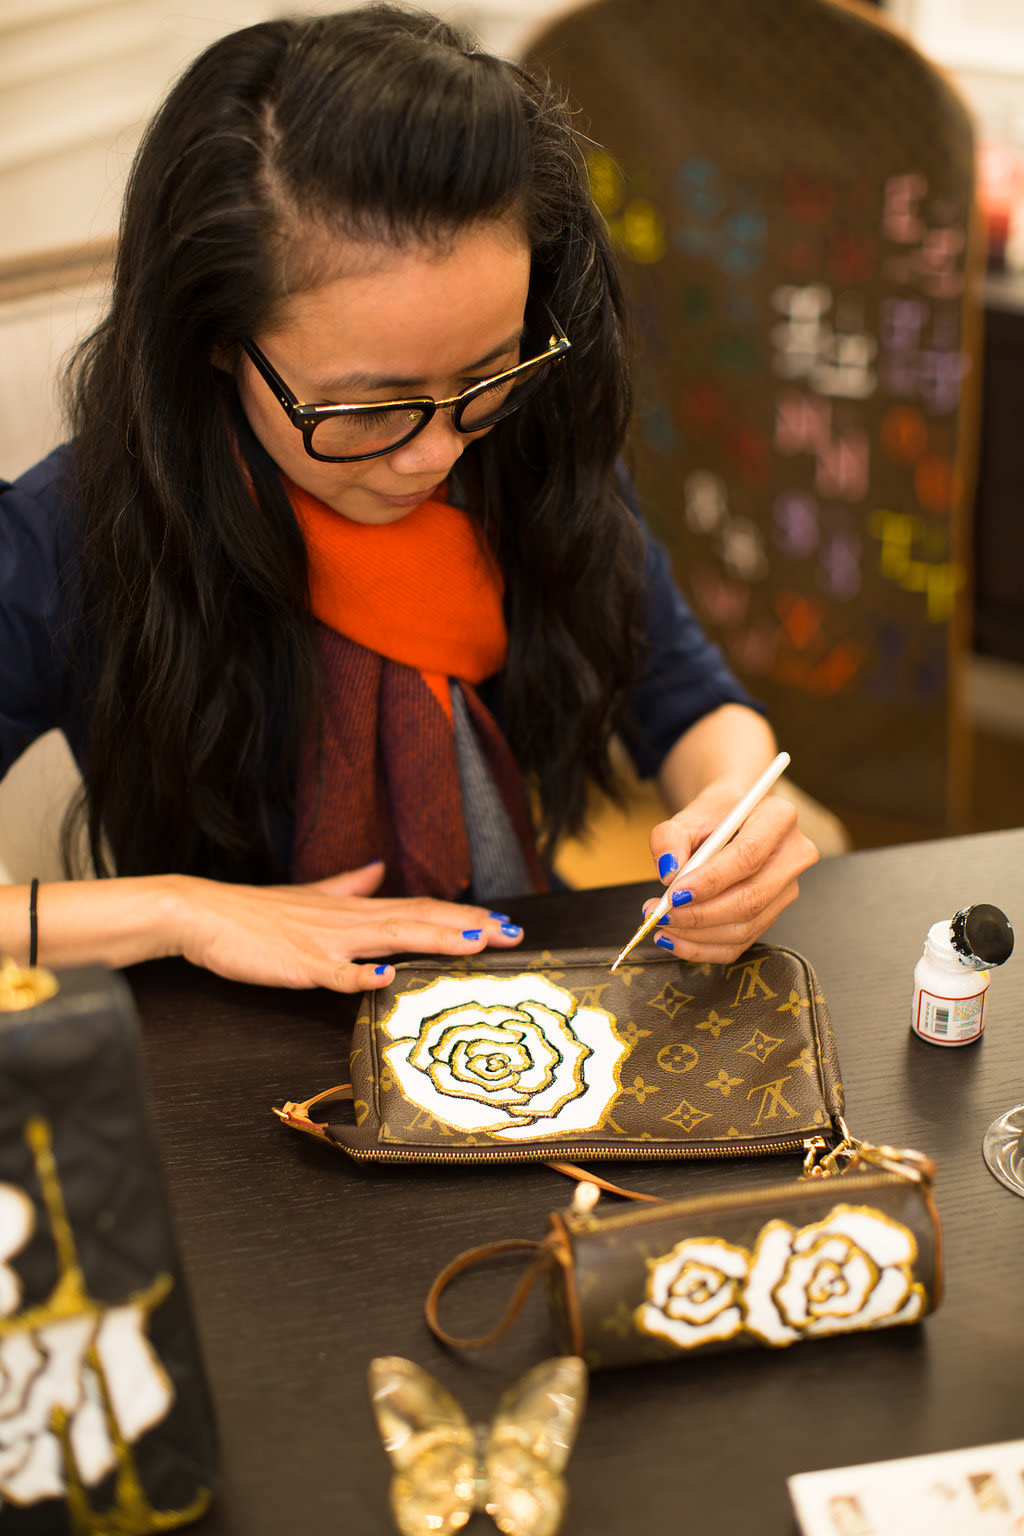 A River Oaks Painting Party Transforms Luxury Bags Into Works of